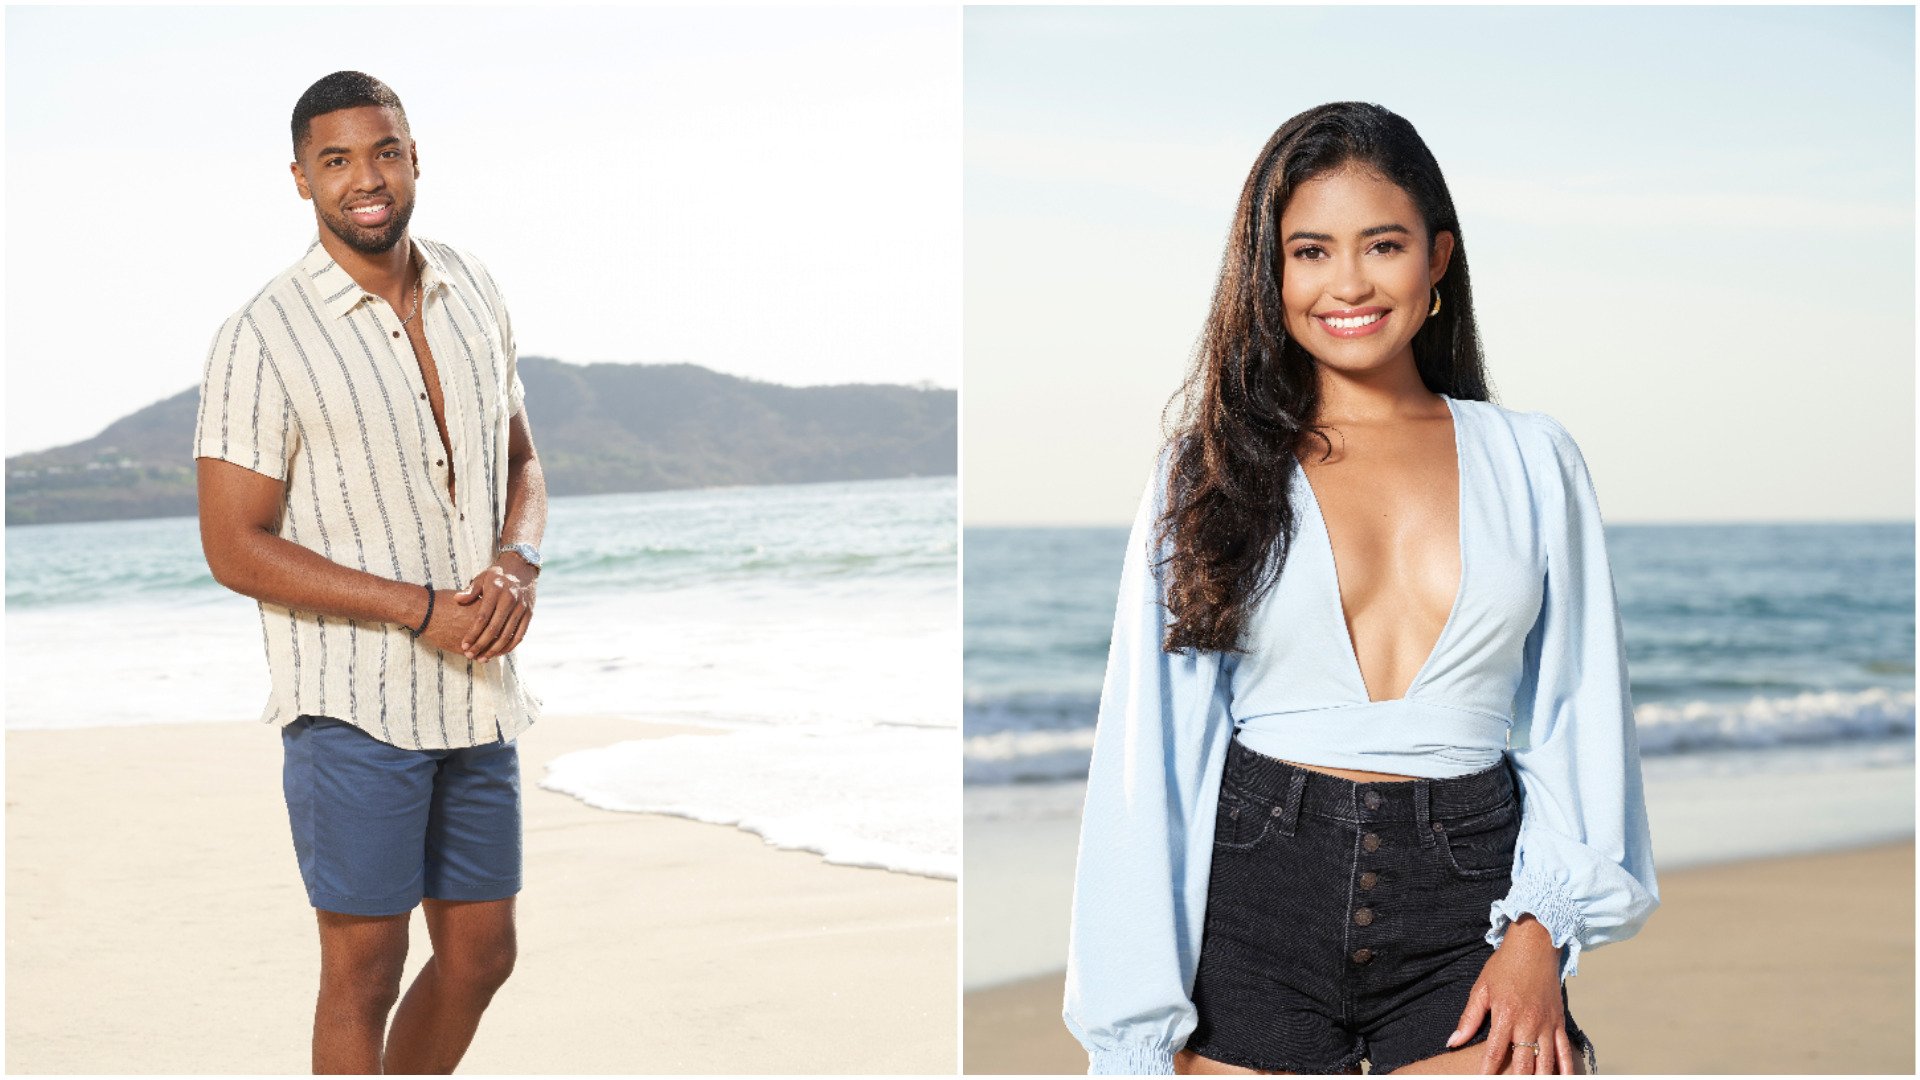 Headshots of Ivan Hall and Jessenia Cruz from the ‘Bachelor in Paradise’ Season 7 cast in 2021